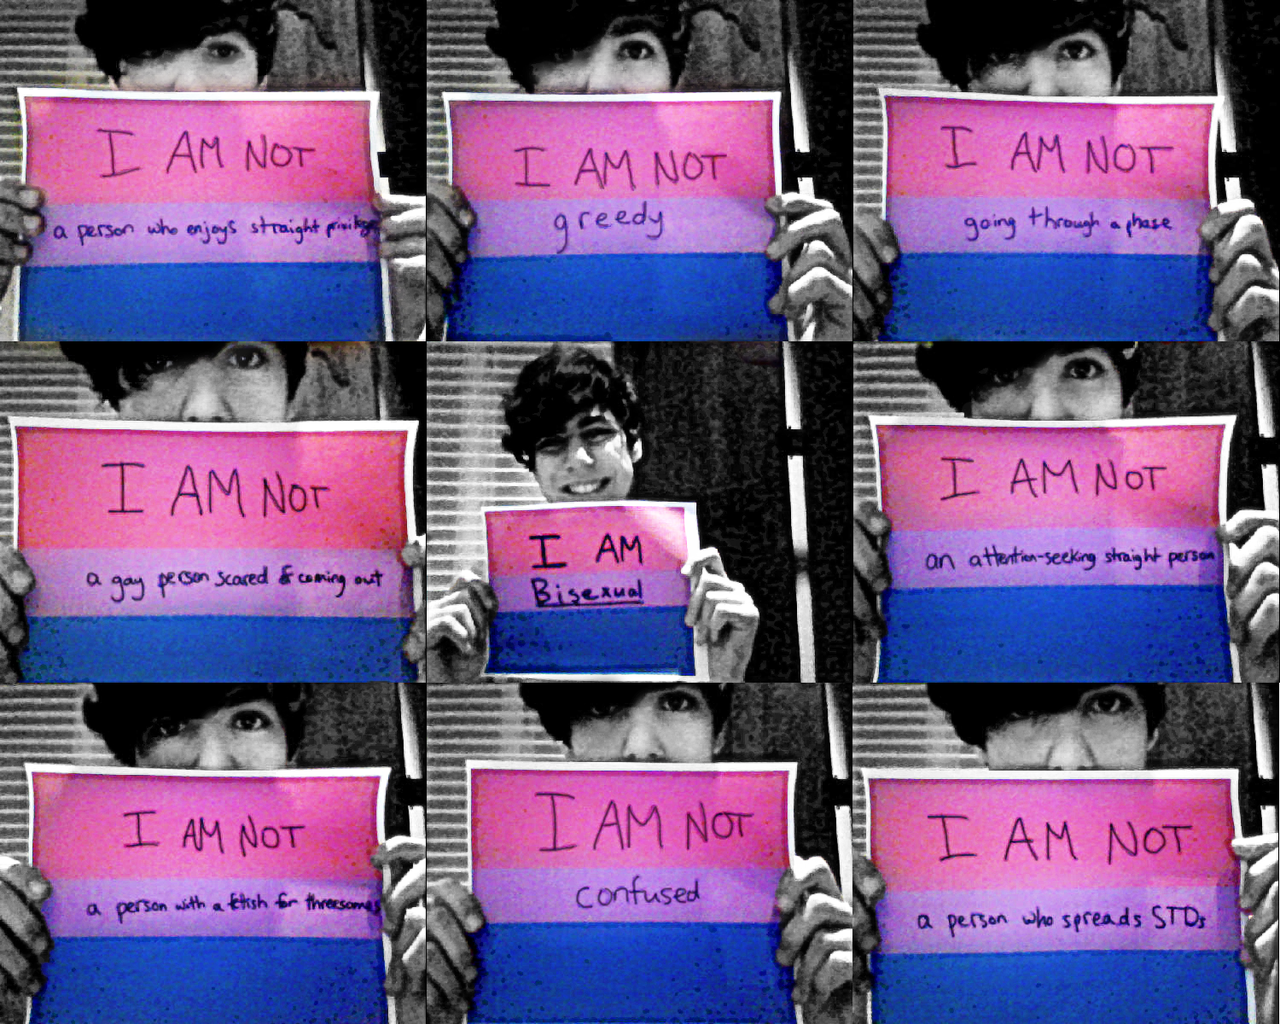 The I am Project